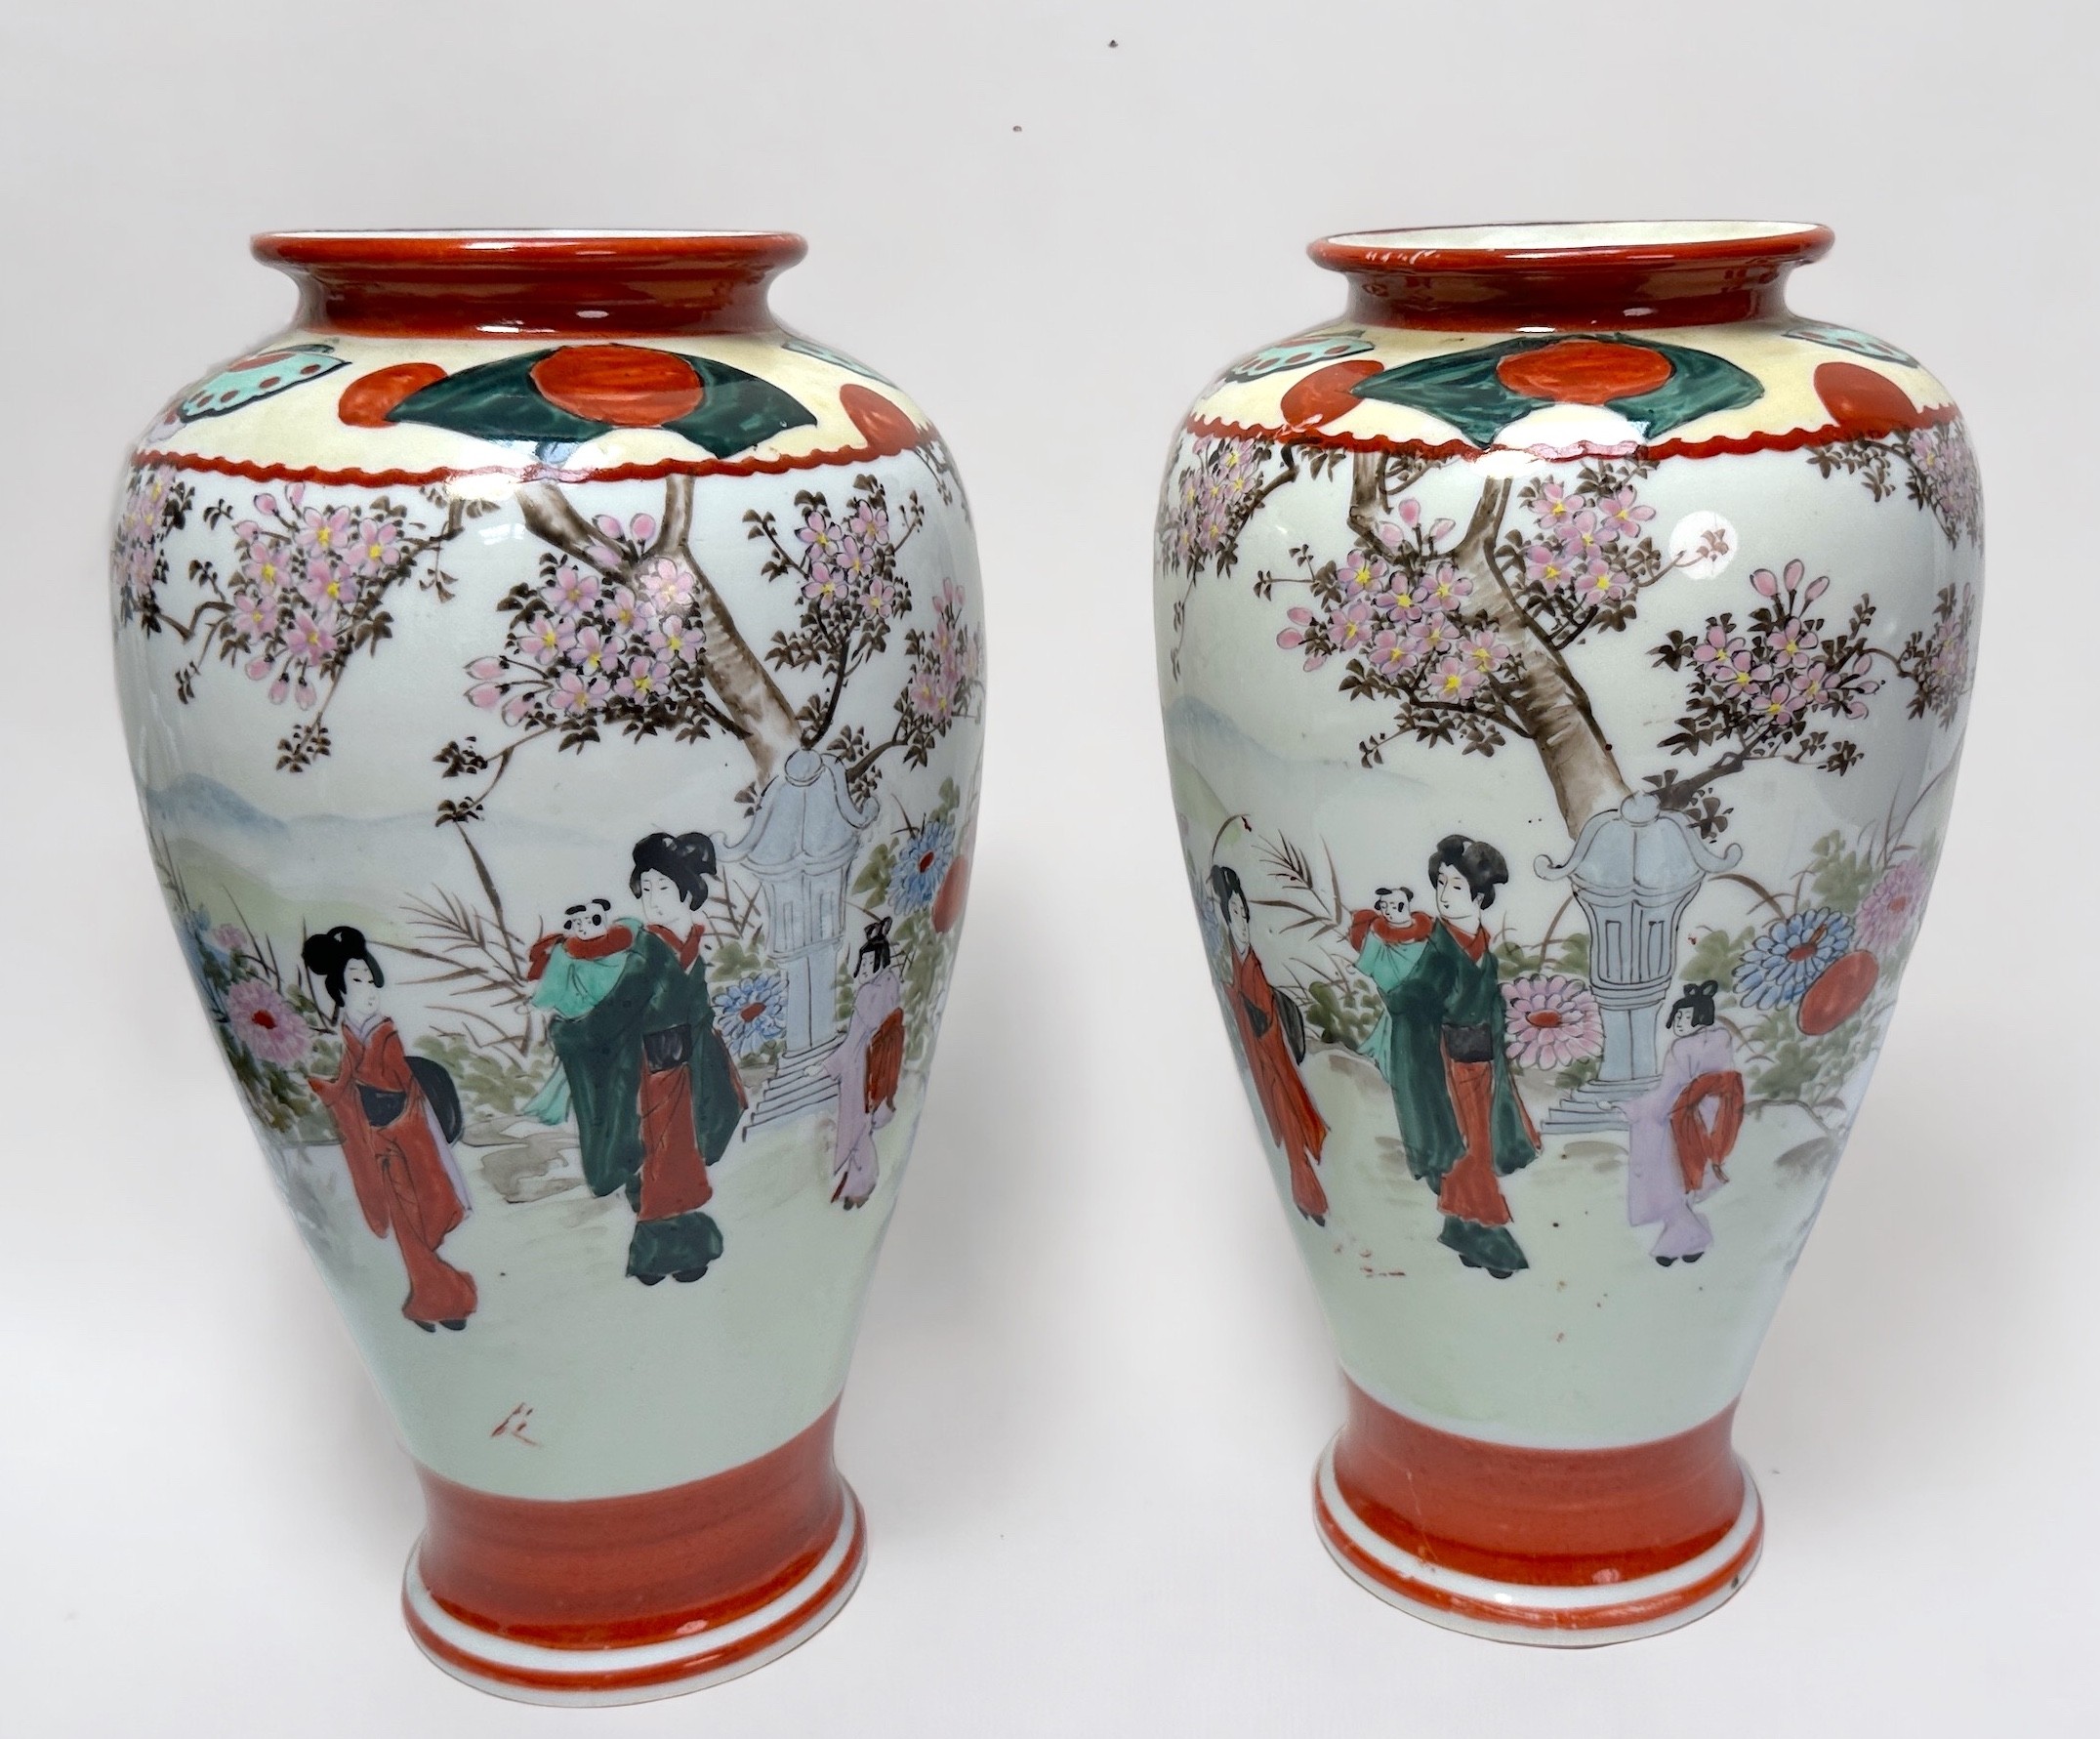 A pair of Japanese porcelain vases, of ovoid form painted with Geisha girls in a blossom landscape